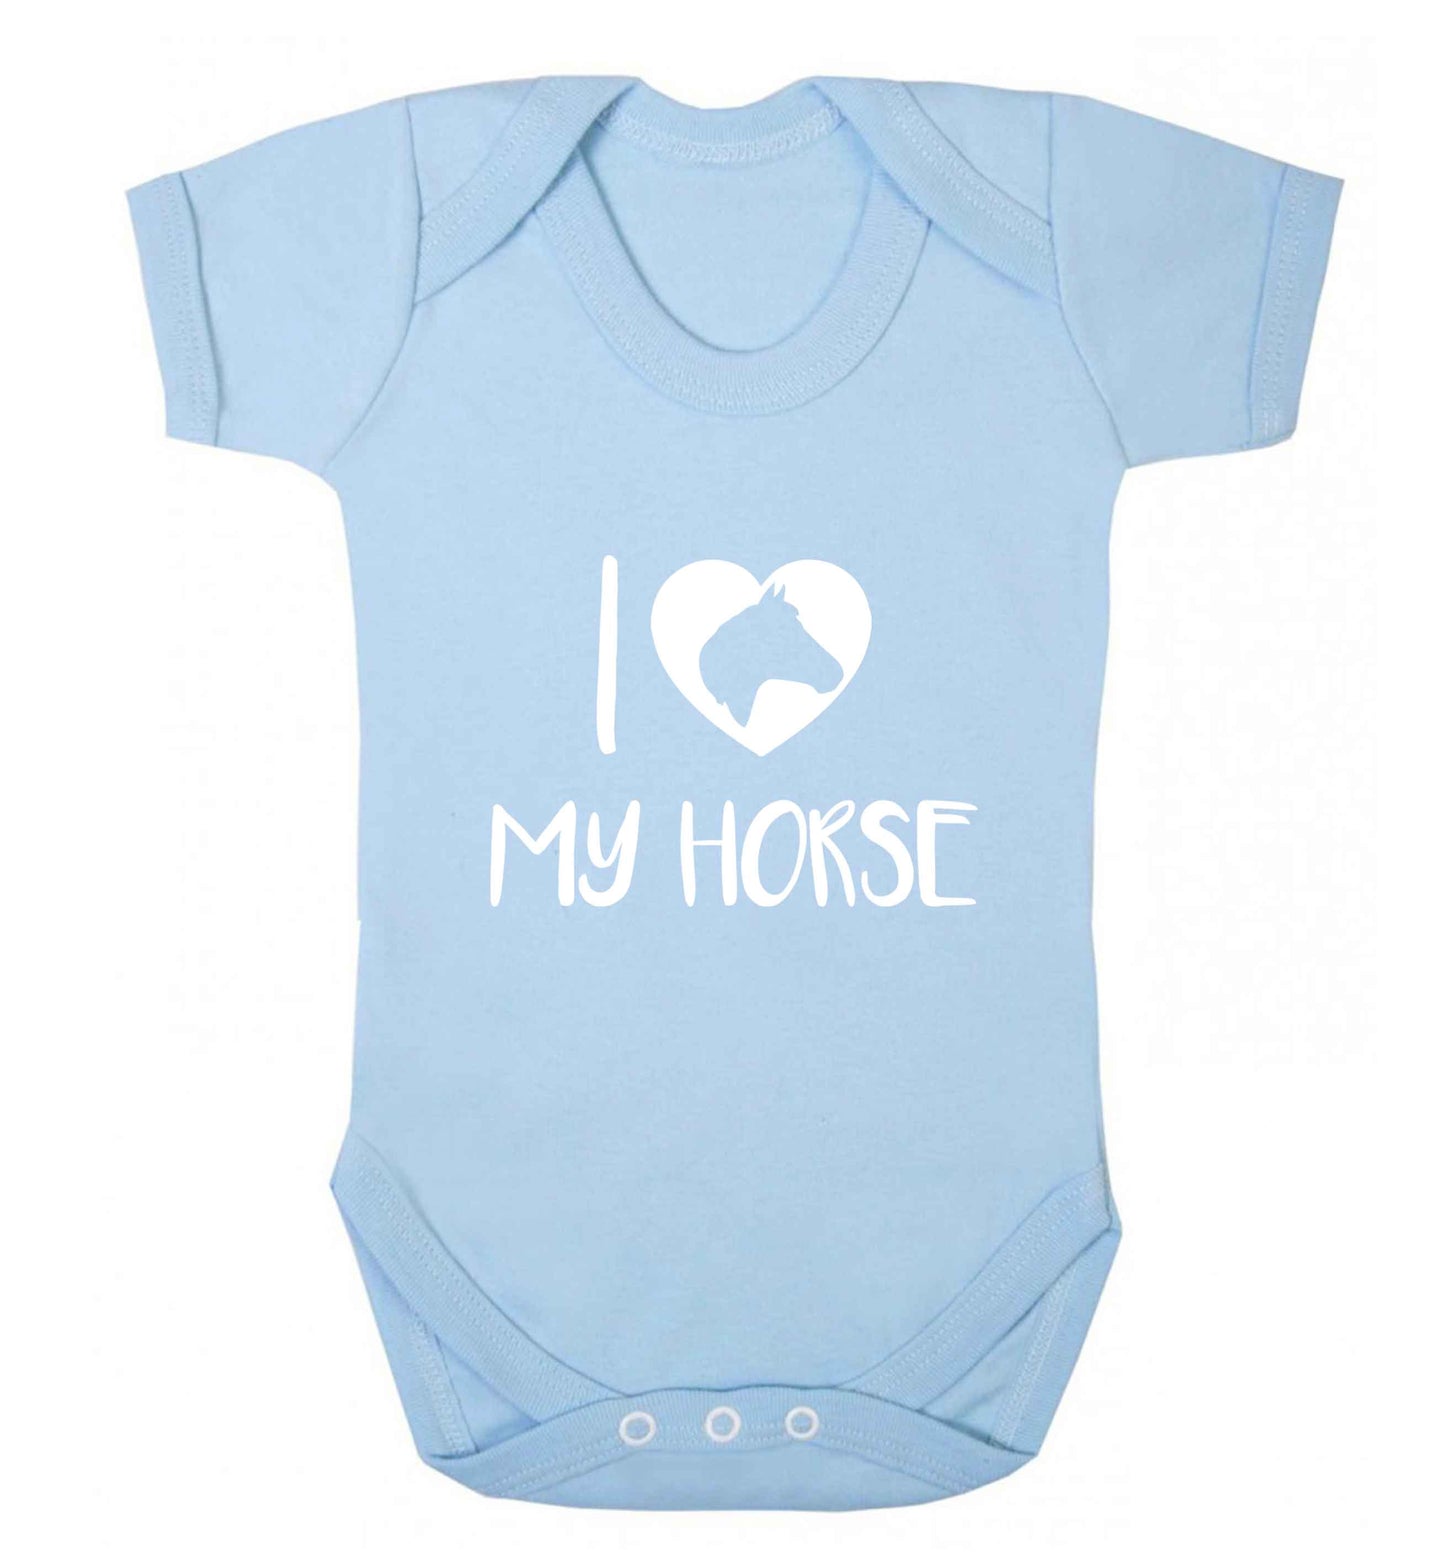 I love my horse baby vest pale blue 18-24 months